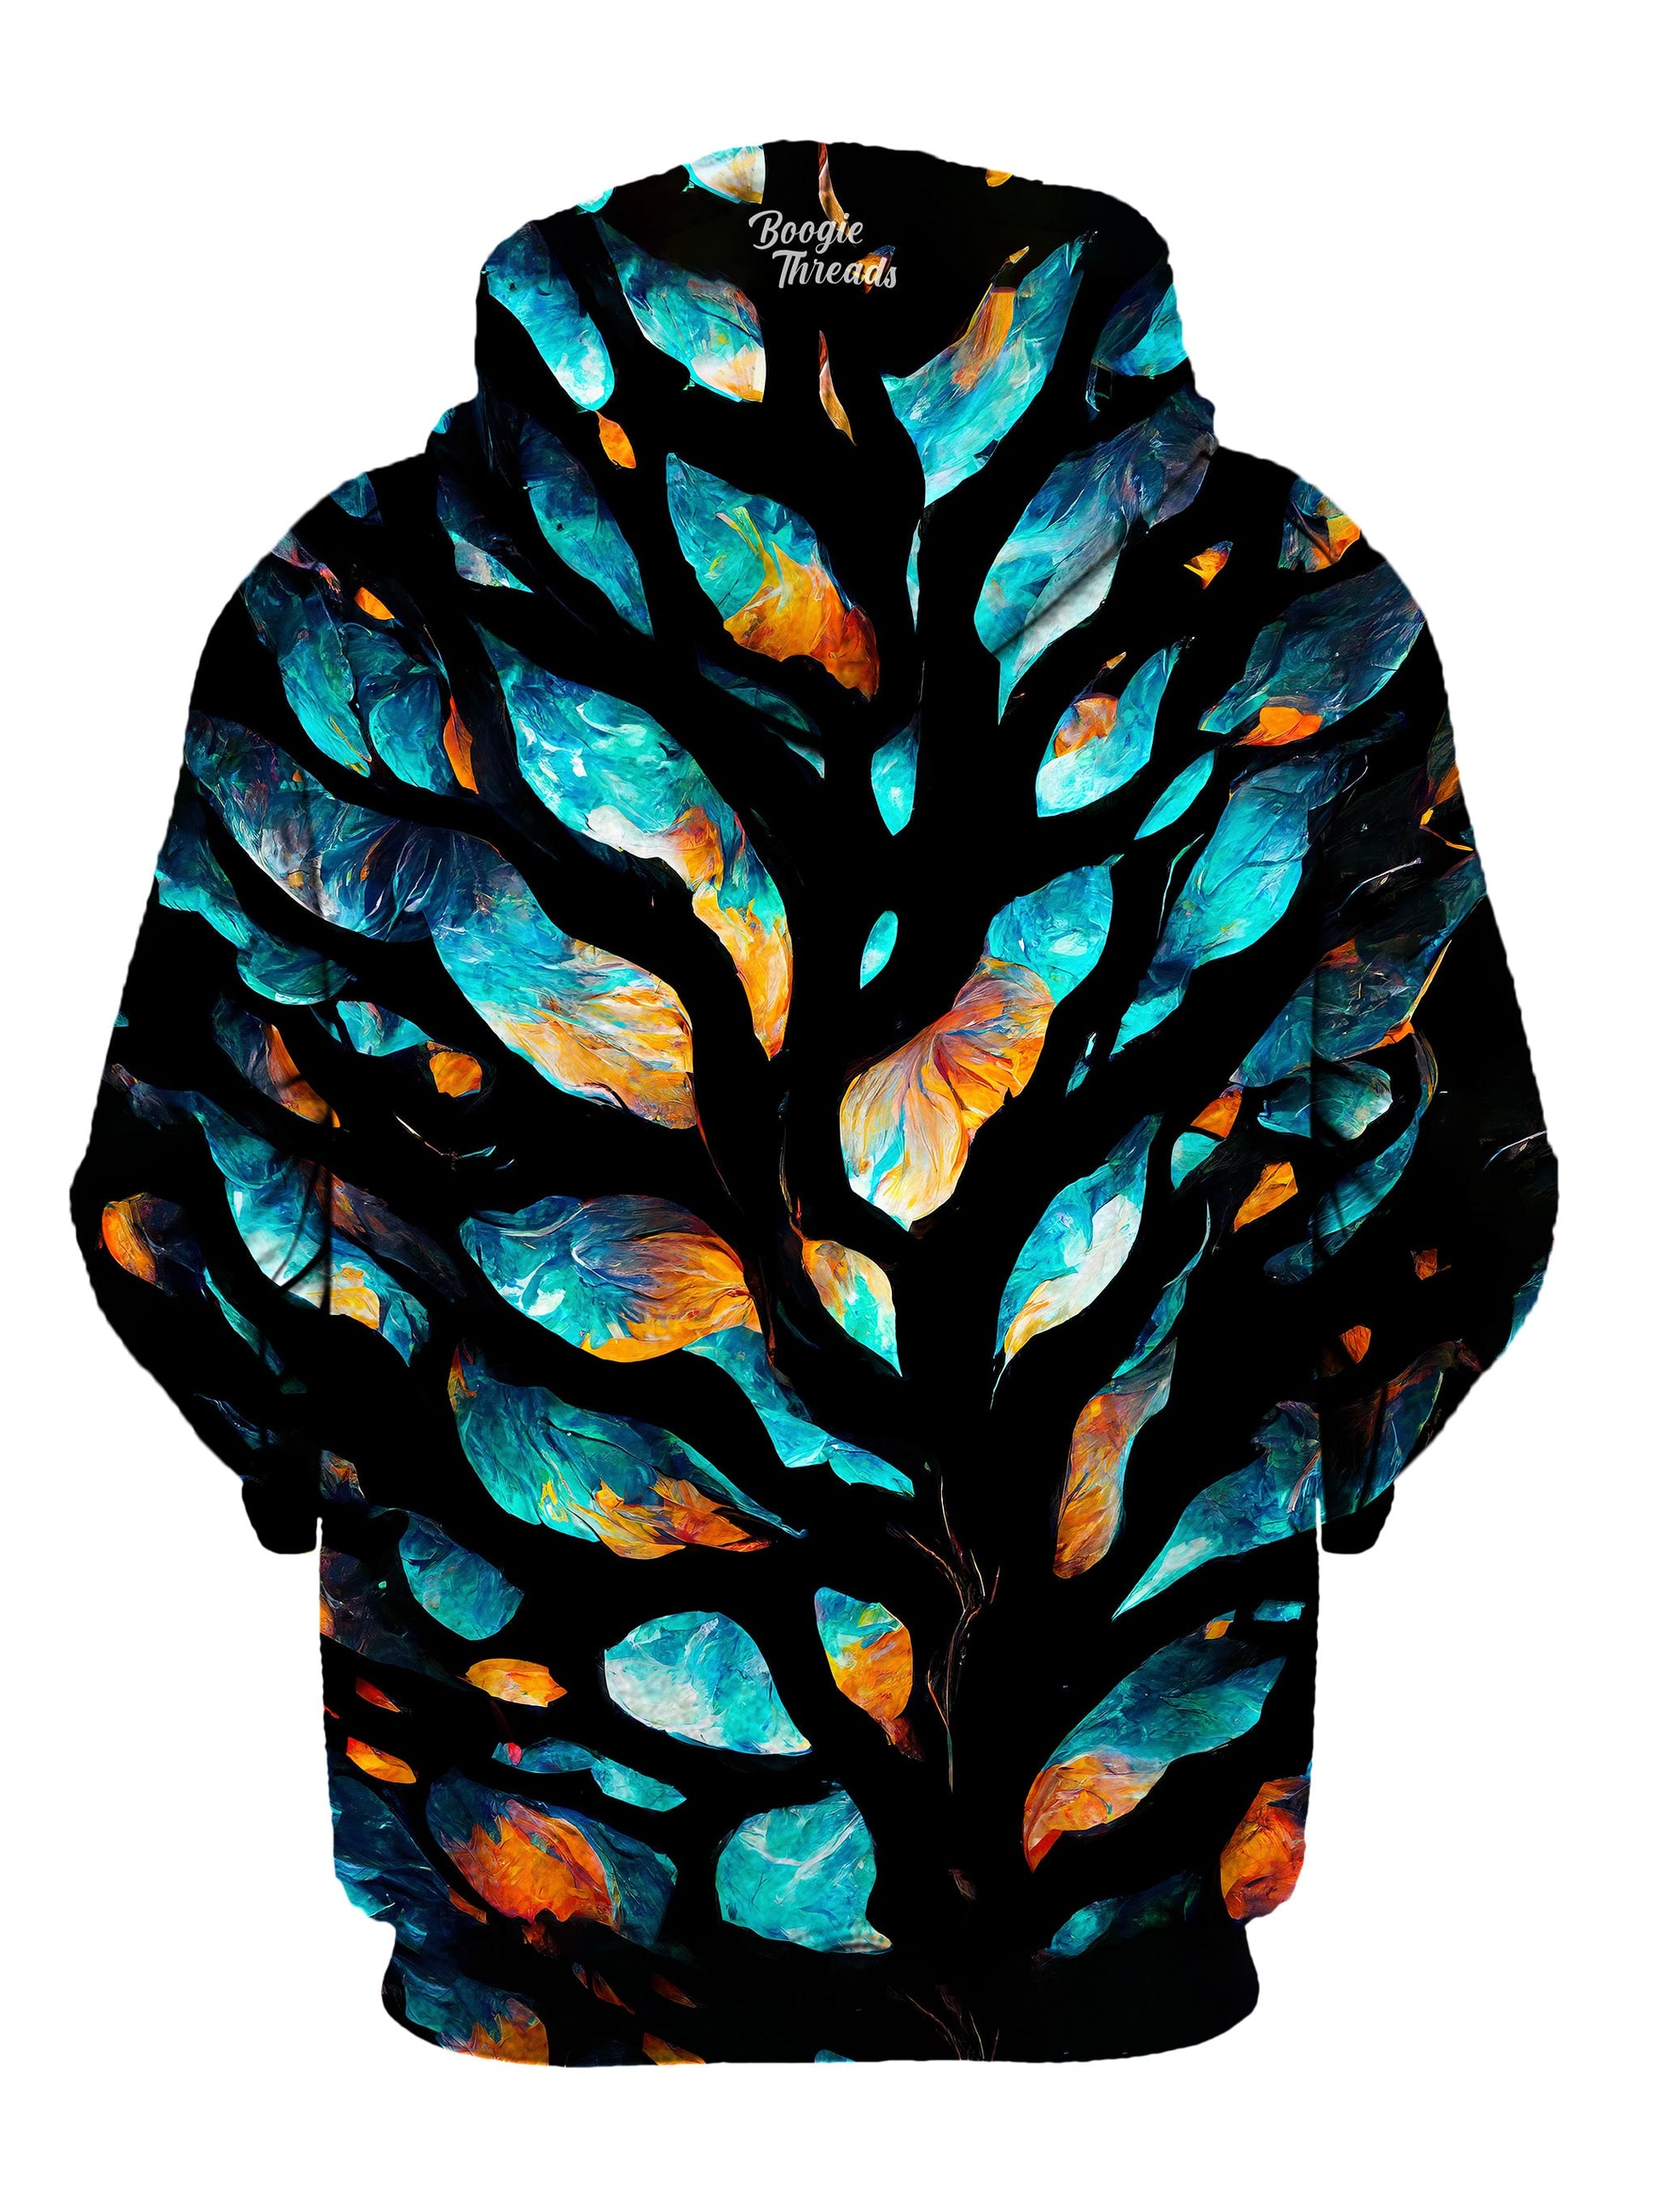 Lone Ideal Unisex Pullover Hoodie - EDM Festival Clothing - Boogie Threads